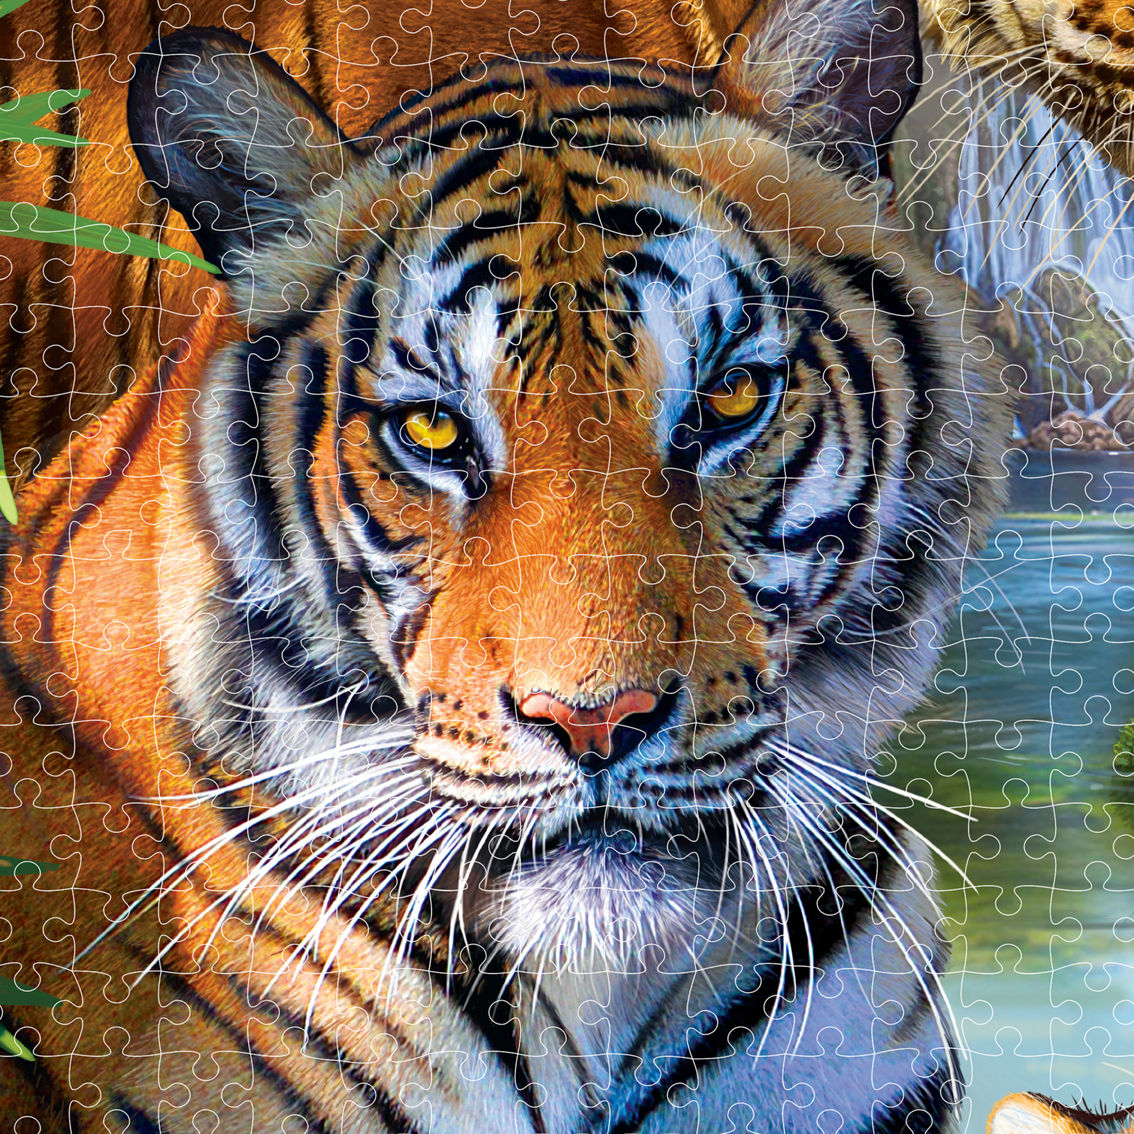 Mindbogglers Artisan in the Jungle 2000 pc. Puzzle - Image 6 of 8